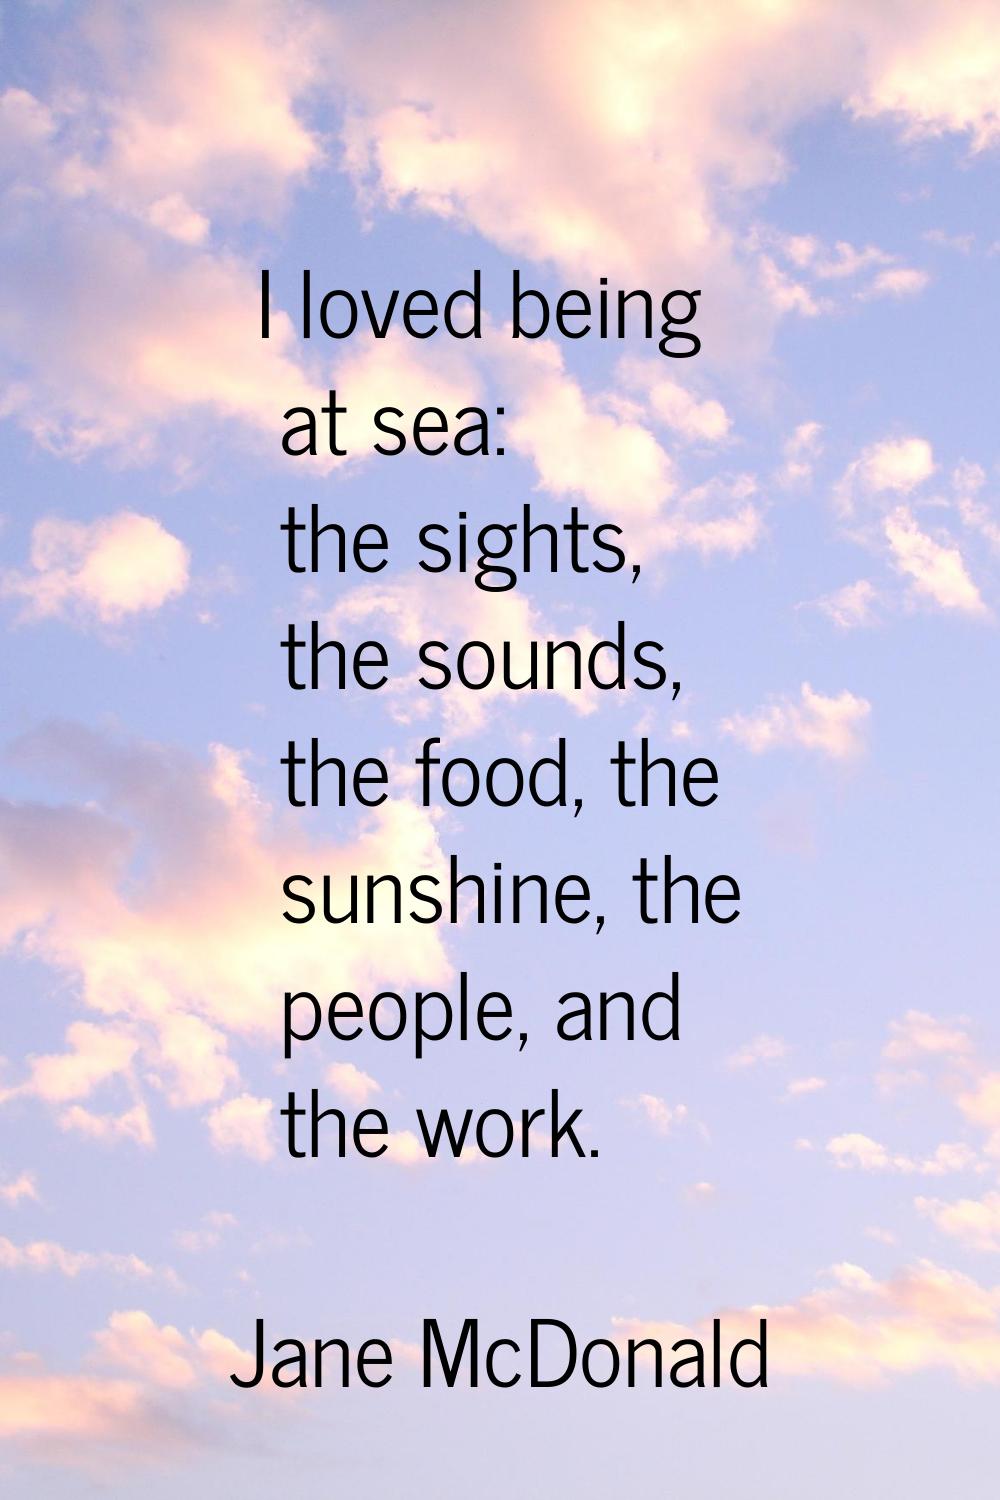 I loved being at sea: the sights, the sounds, the food, the sunshine, the people, and the work.